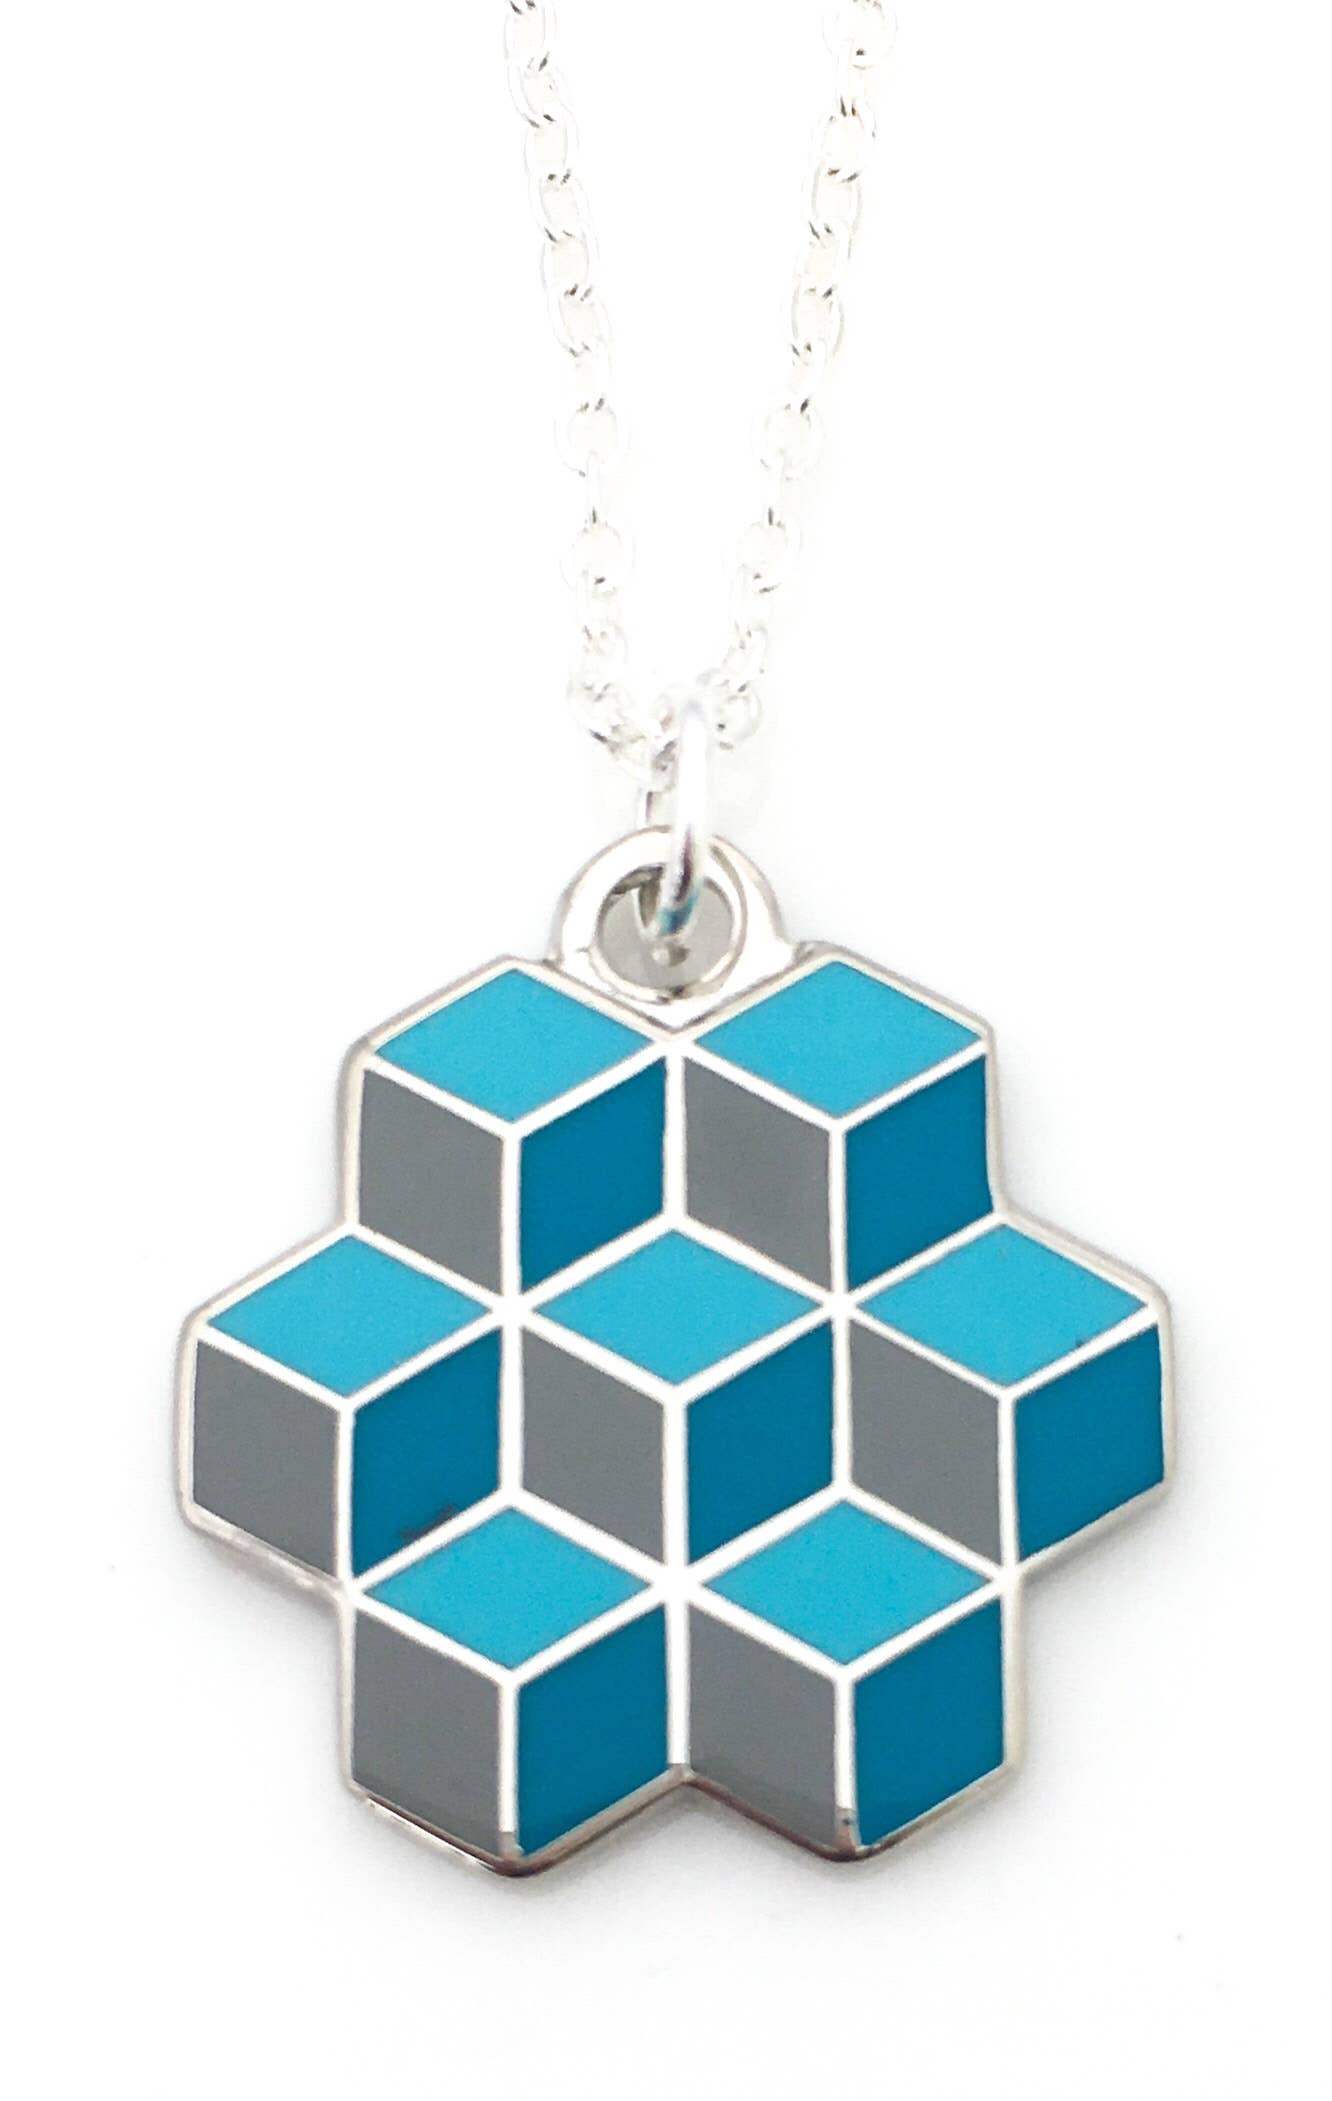 Optical illusion pendant of stacked blue enamel cubes in an pentagon shape